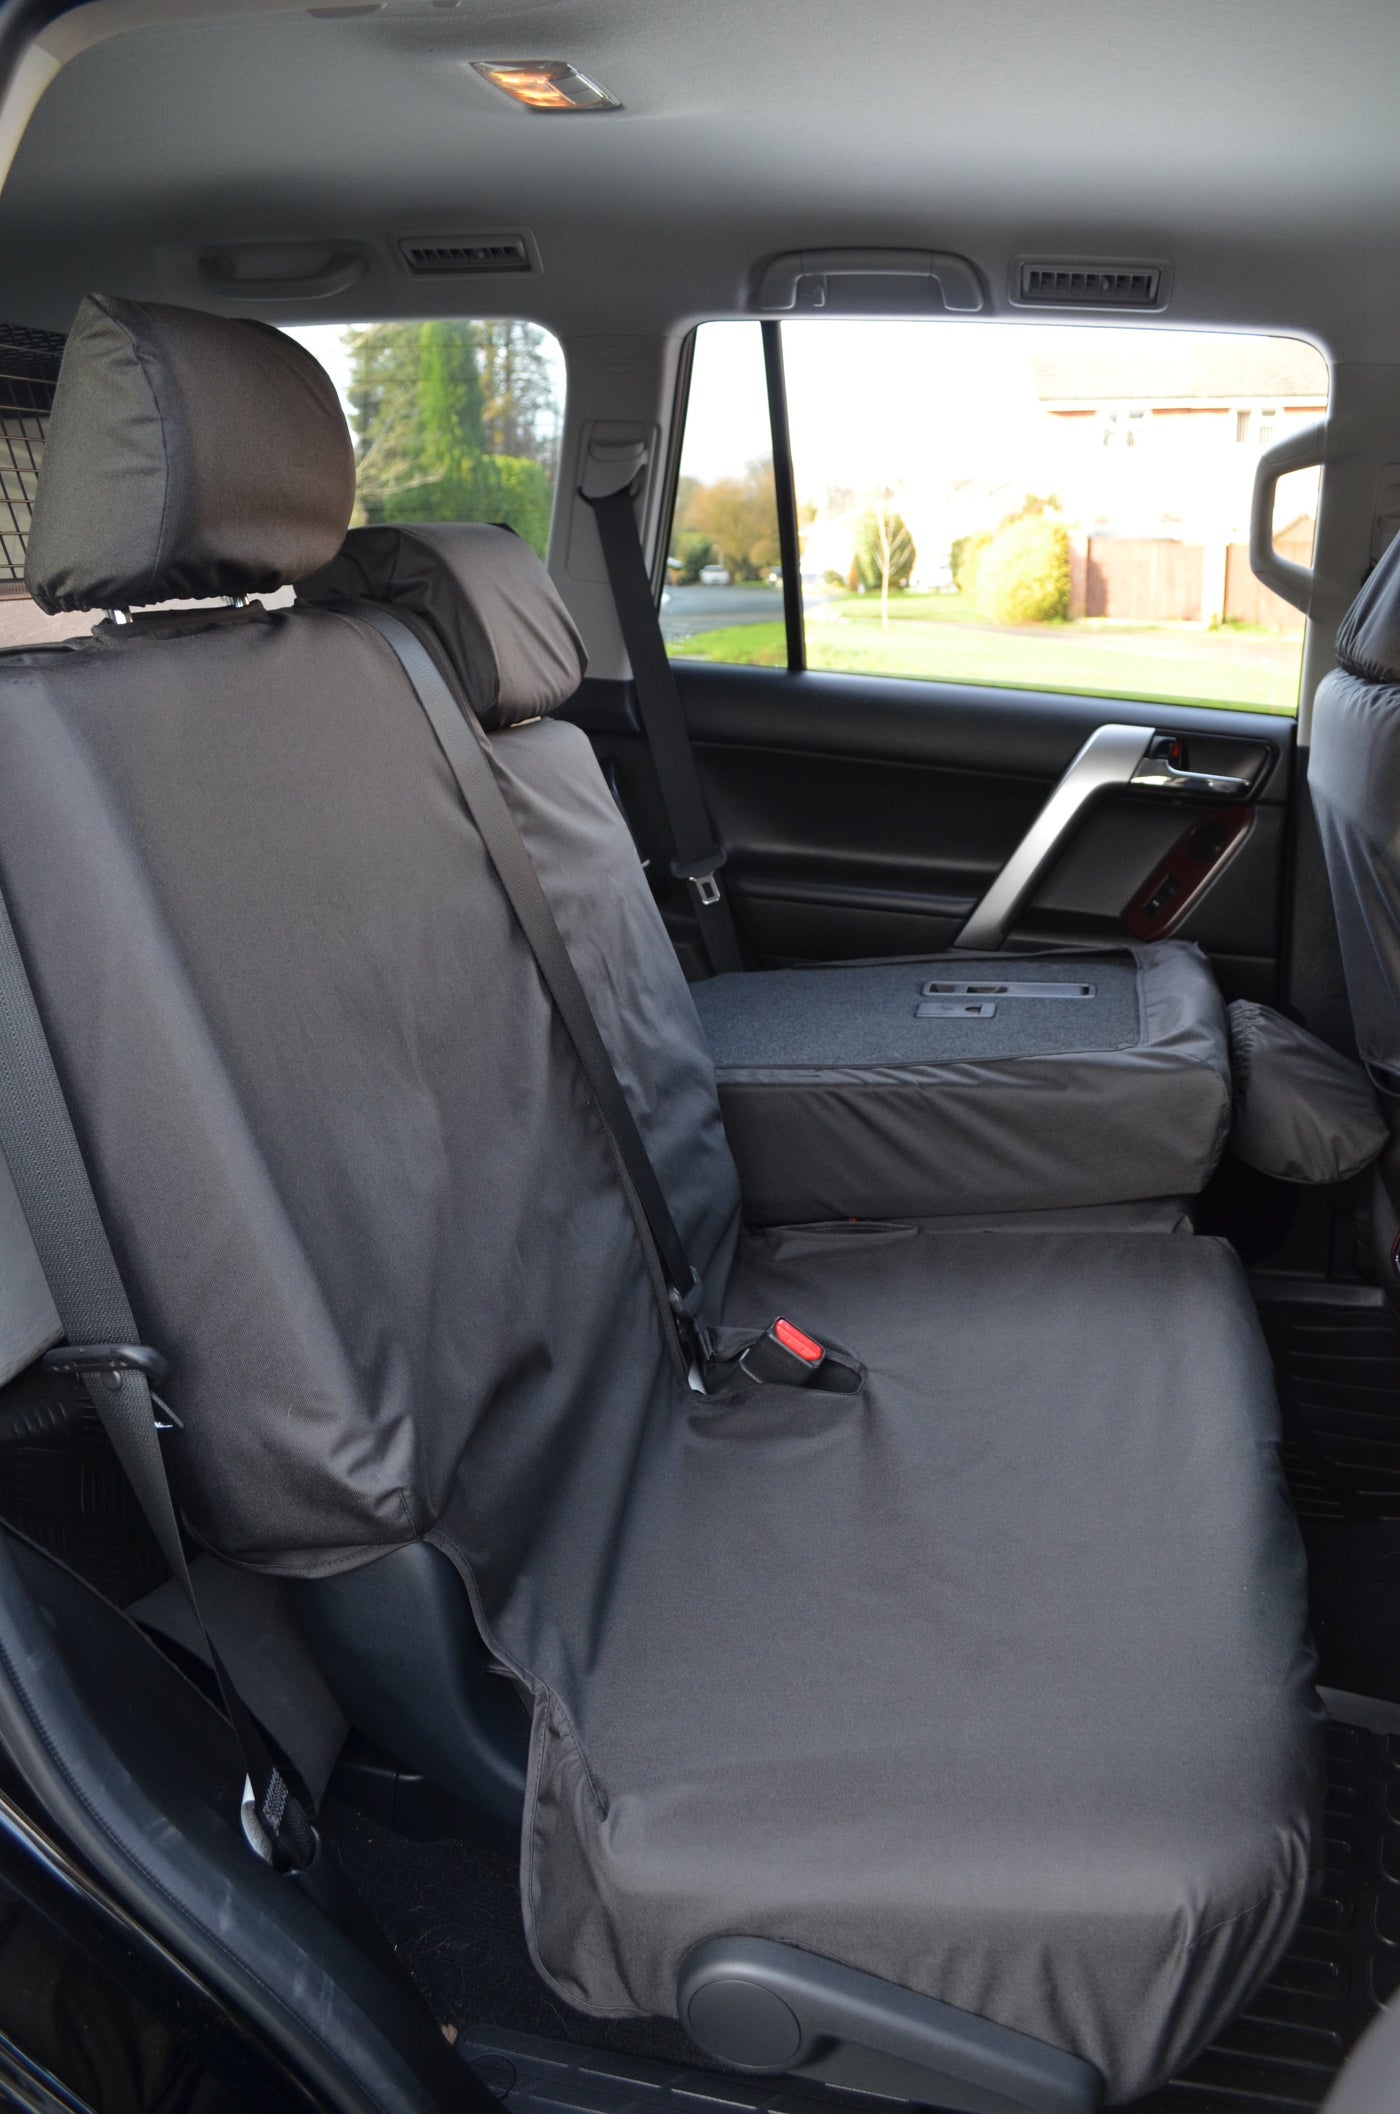 Toyota Land Cruiser 2009+ Tailored and Waterproof Seat Covers  Scutes Ltd